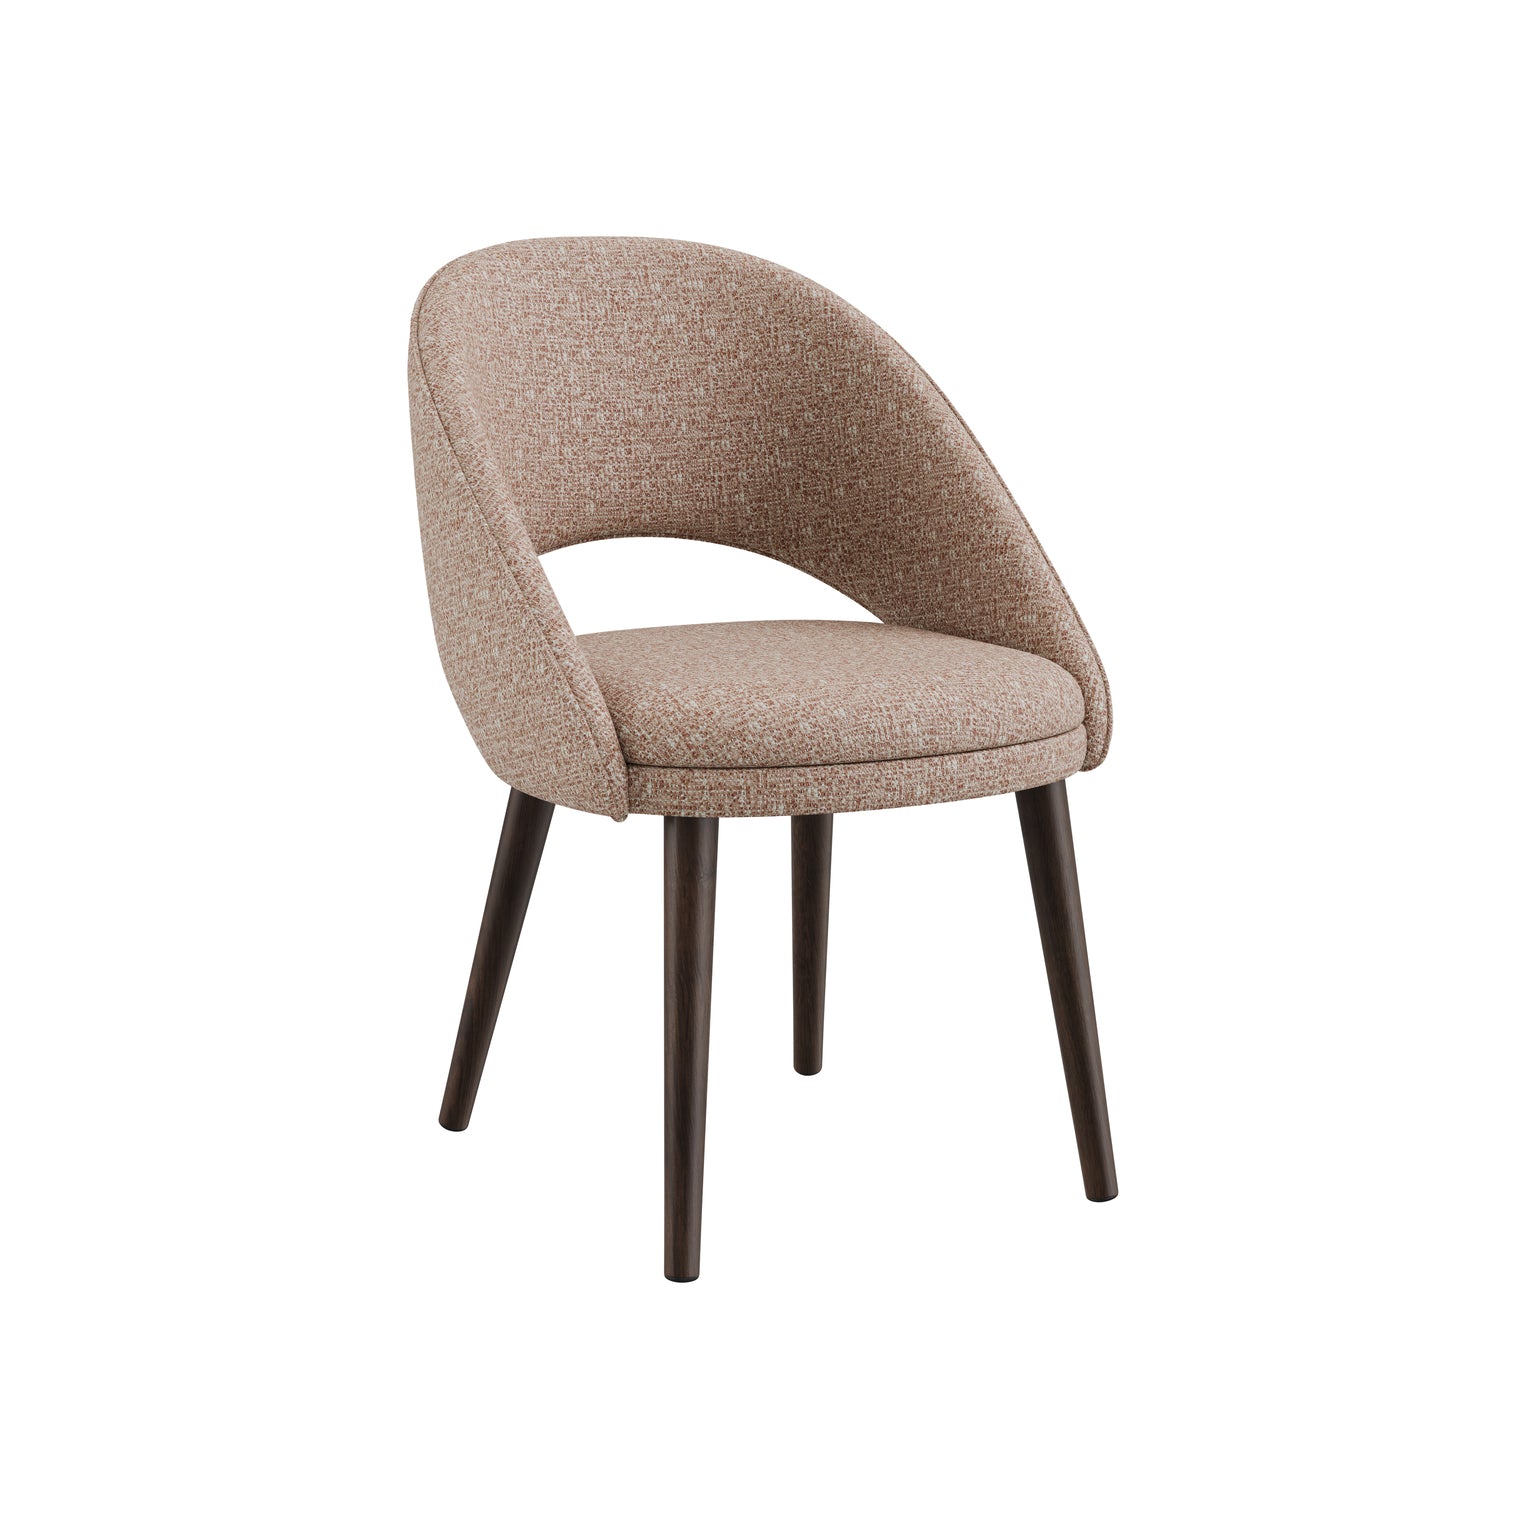 Bend Dining Chair Lucinasco Fabric Lotus